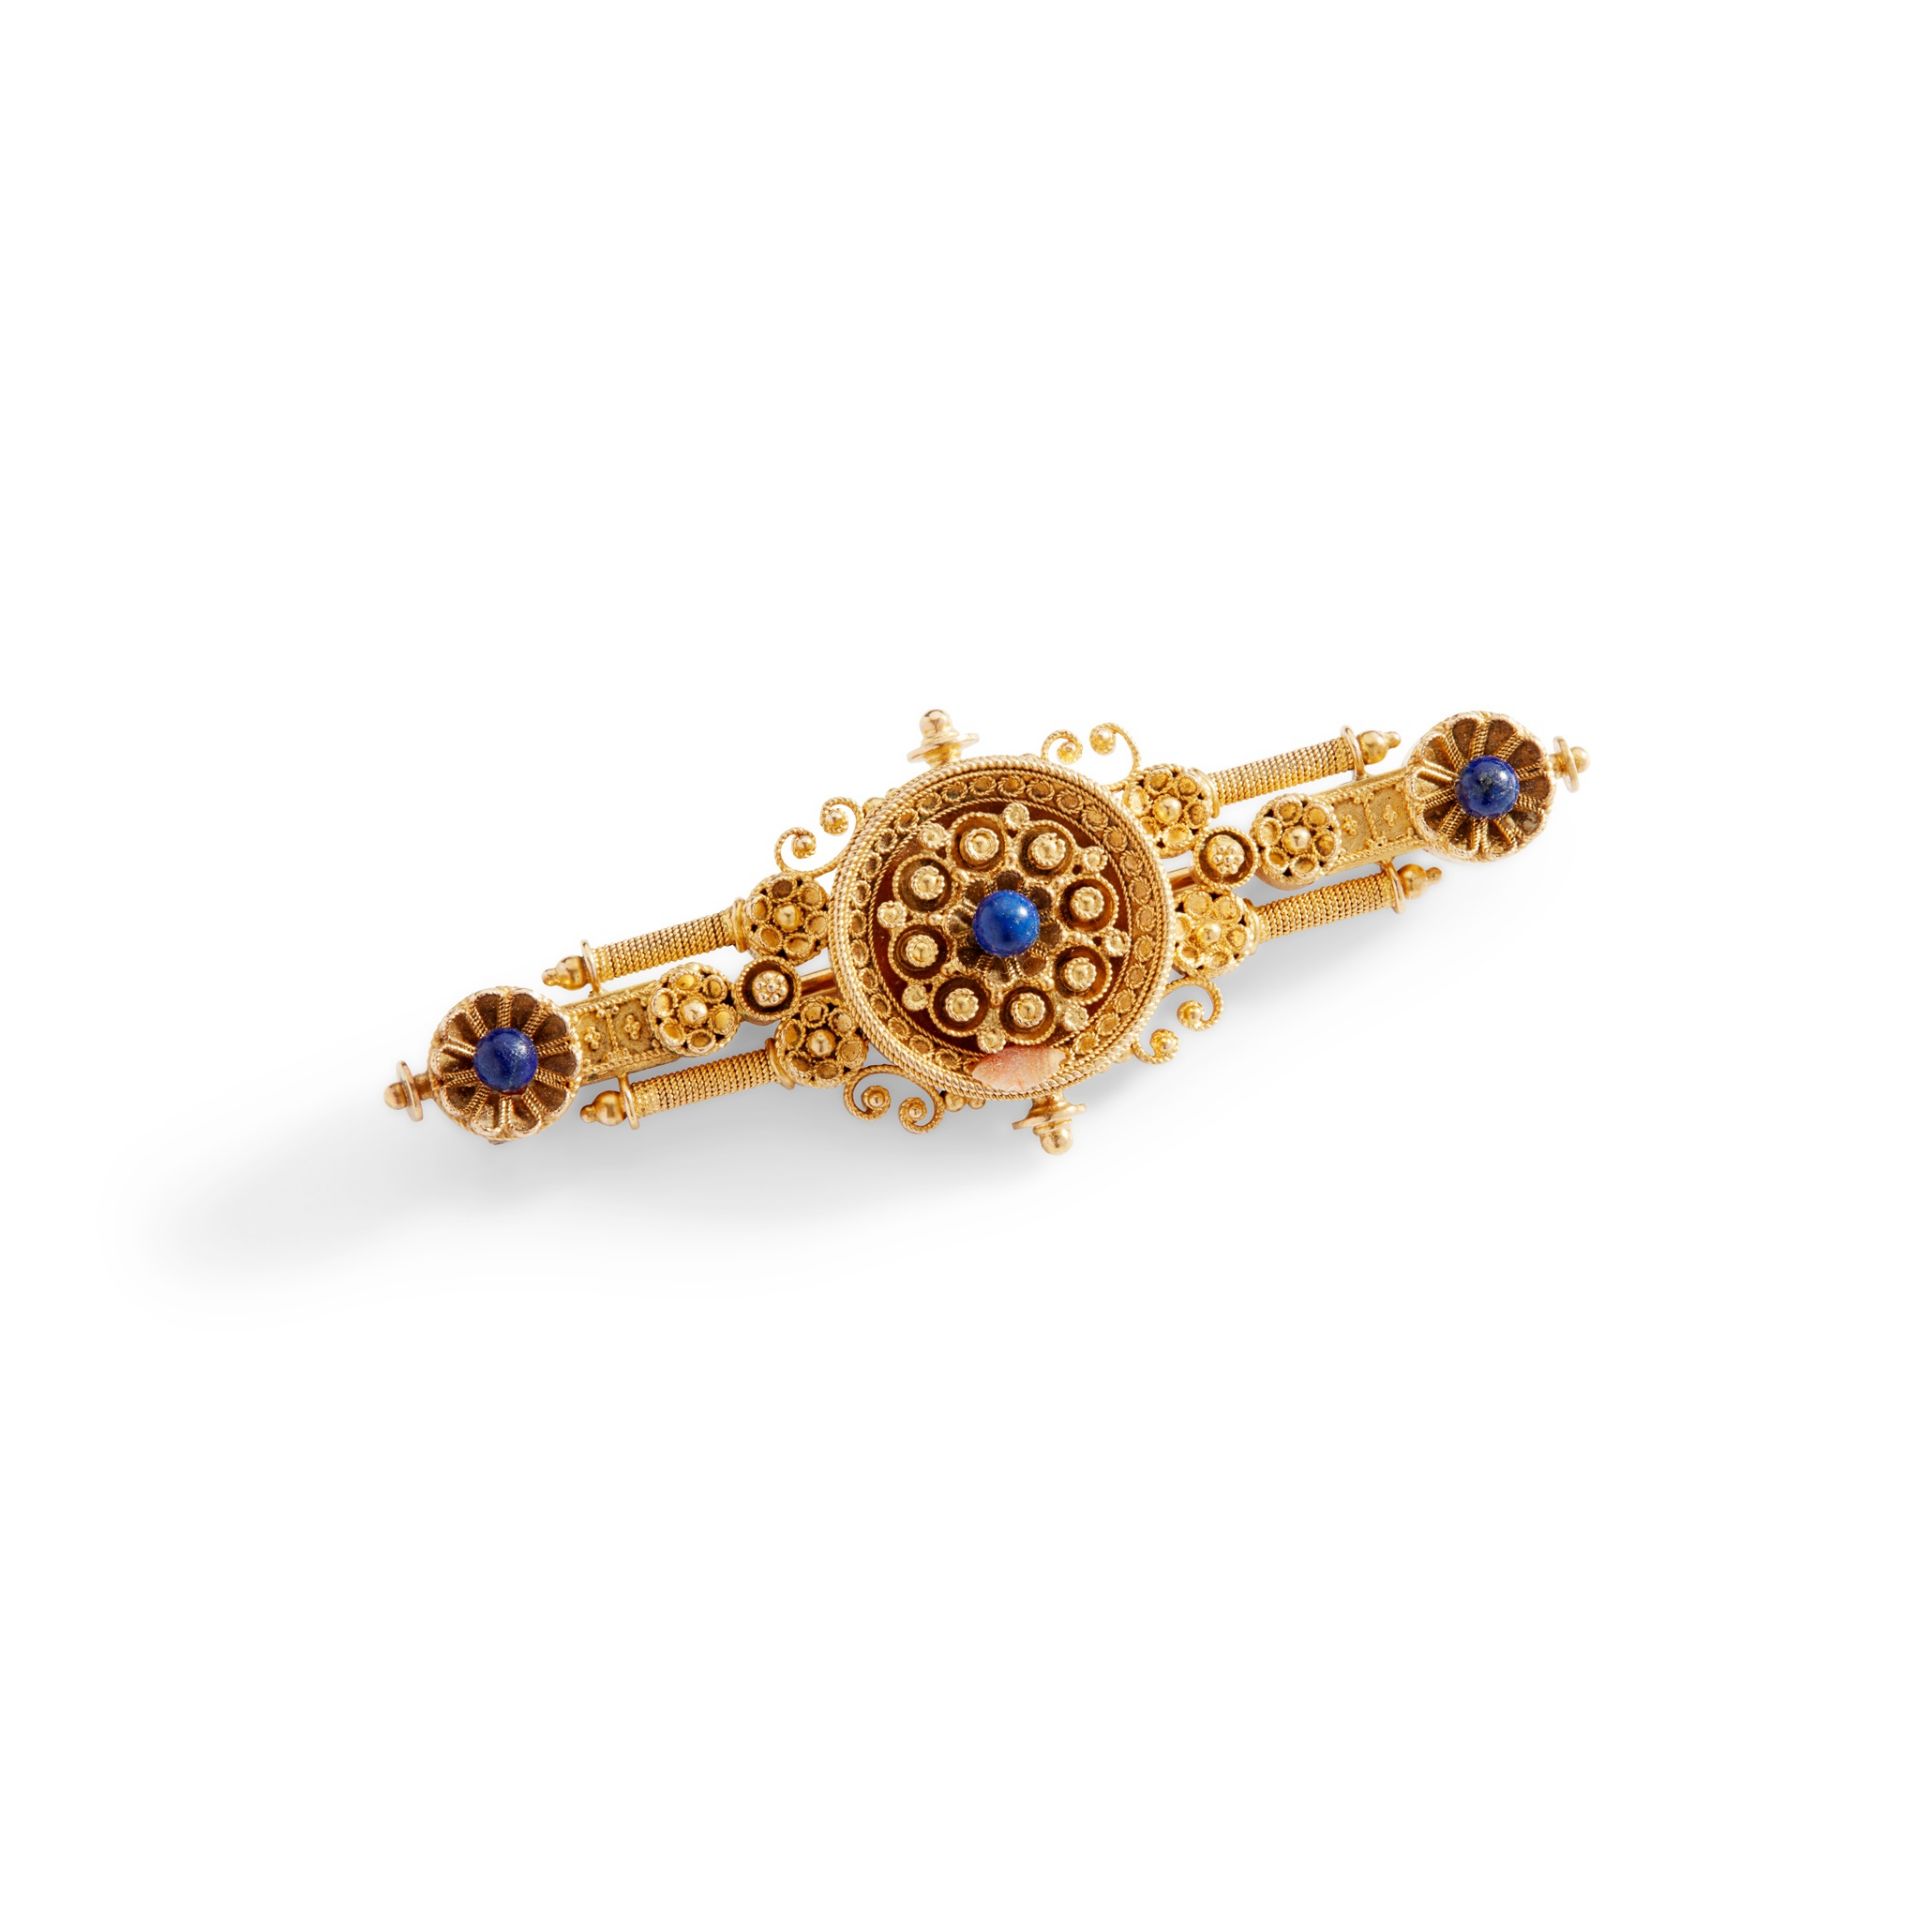 A Victorian Etruscan revival brooch